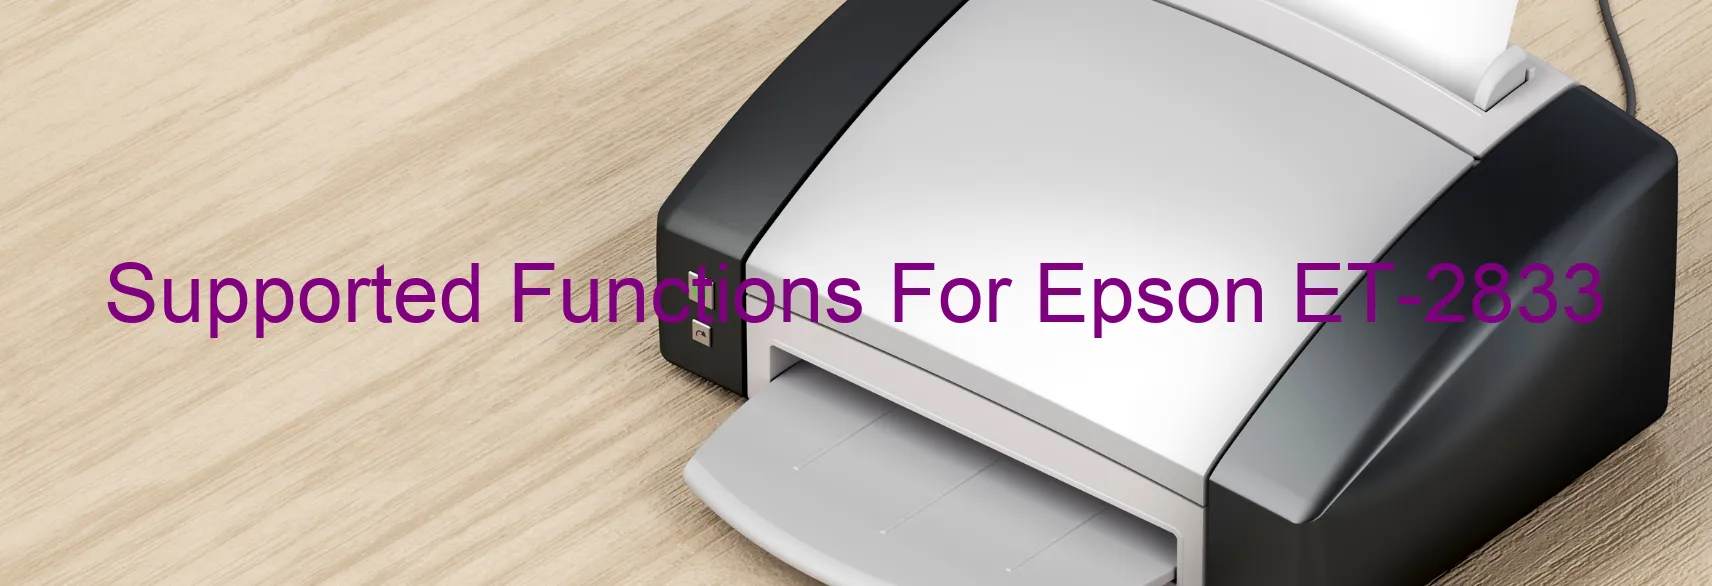 supported-functions-for-epson-et-2833.webp